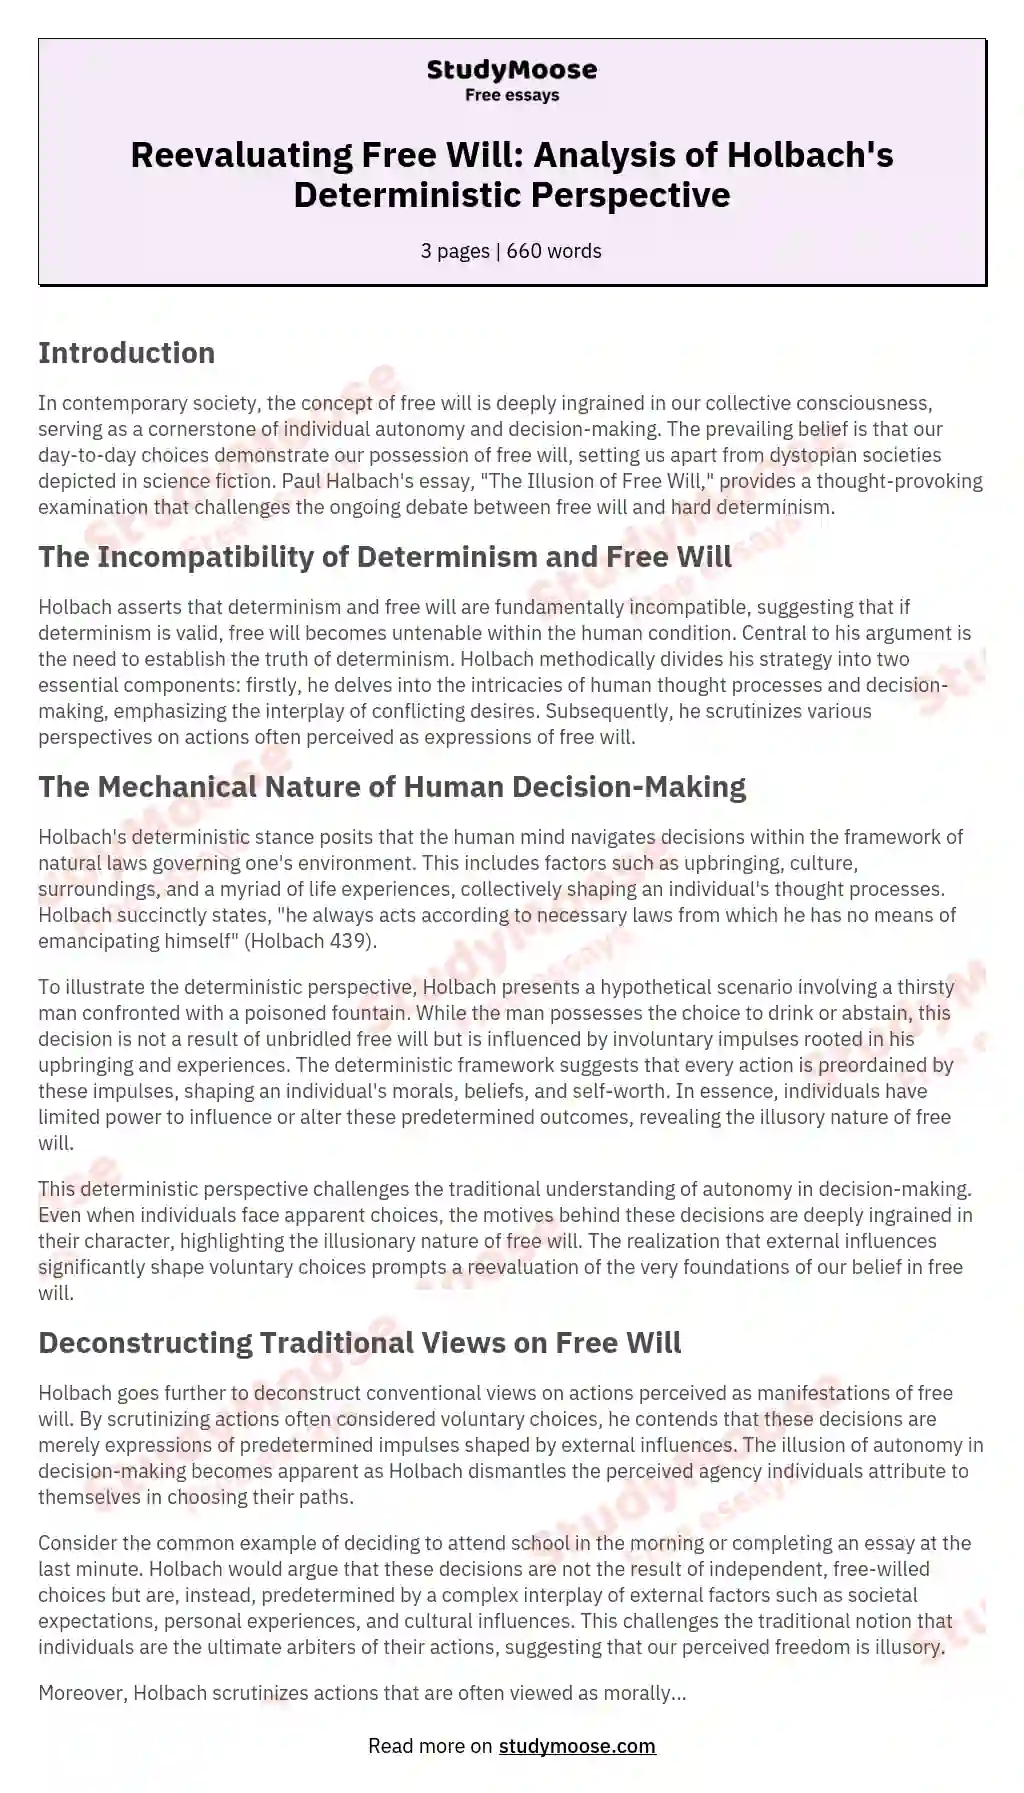 Reevaluating Free Will: Analysis of Holbach's Deterministic Perspective essay